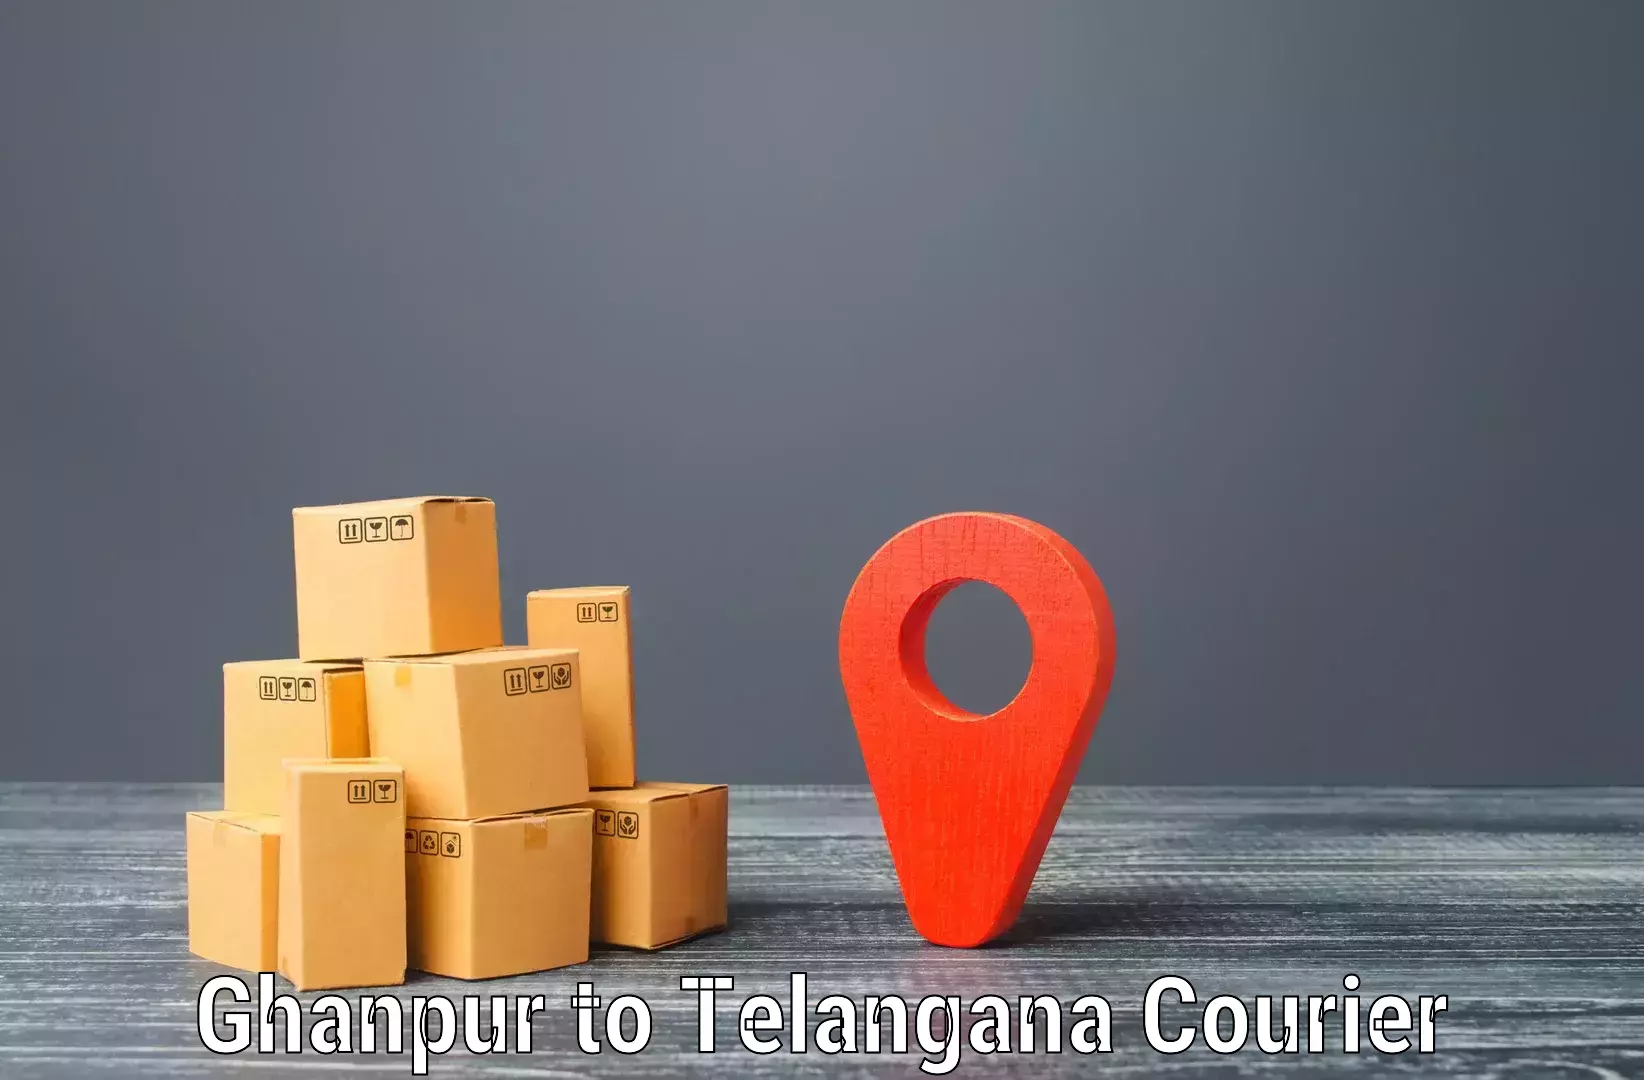 Multi-national courier services Ghanpur to Nereducharla